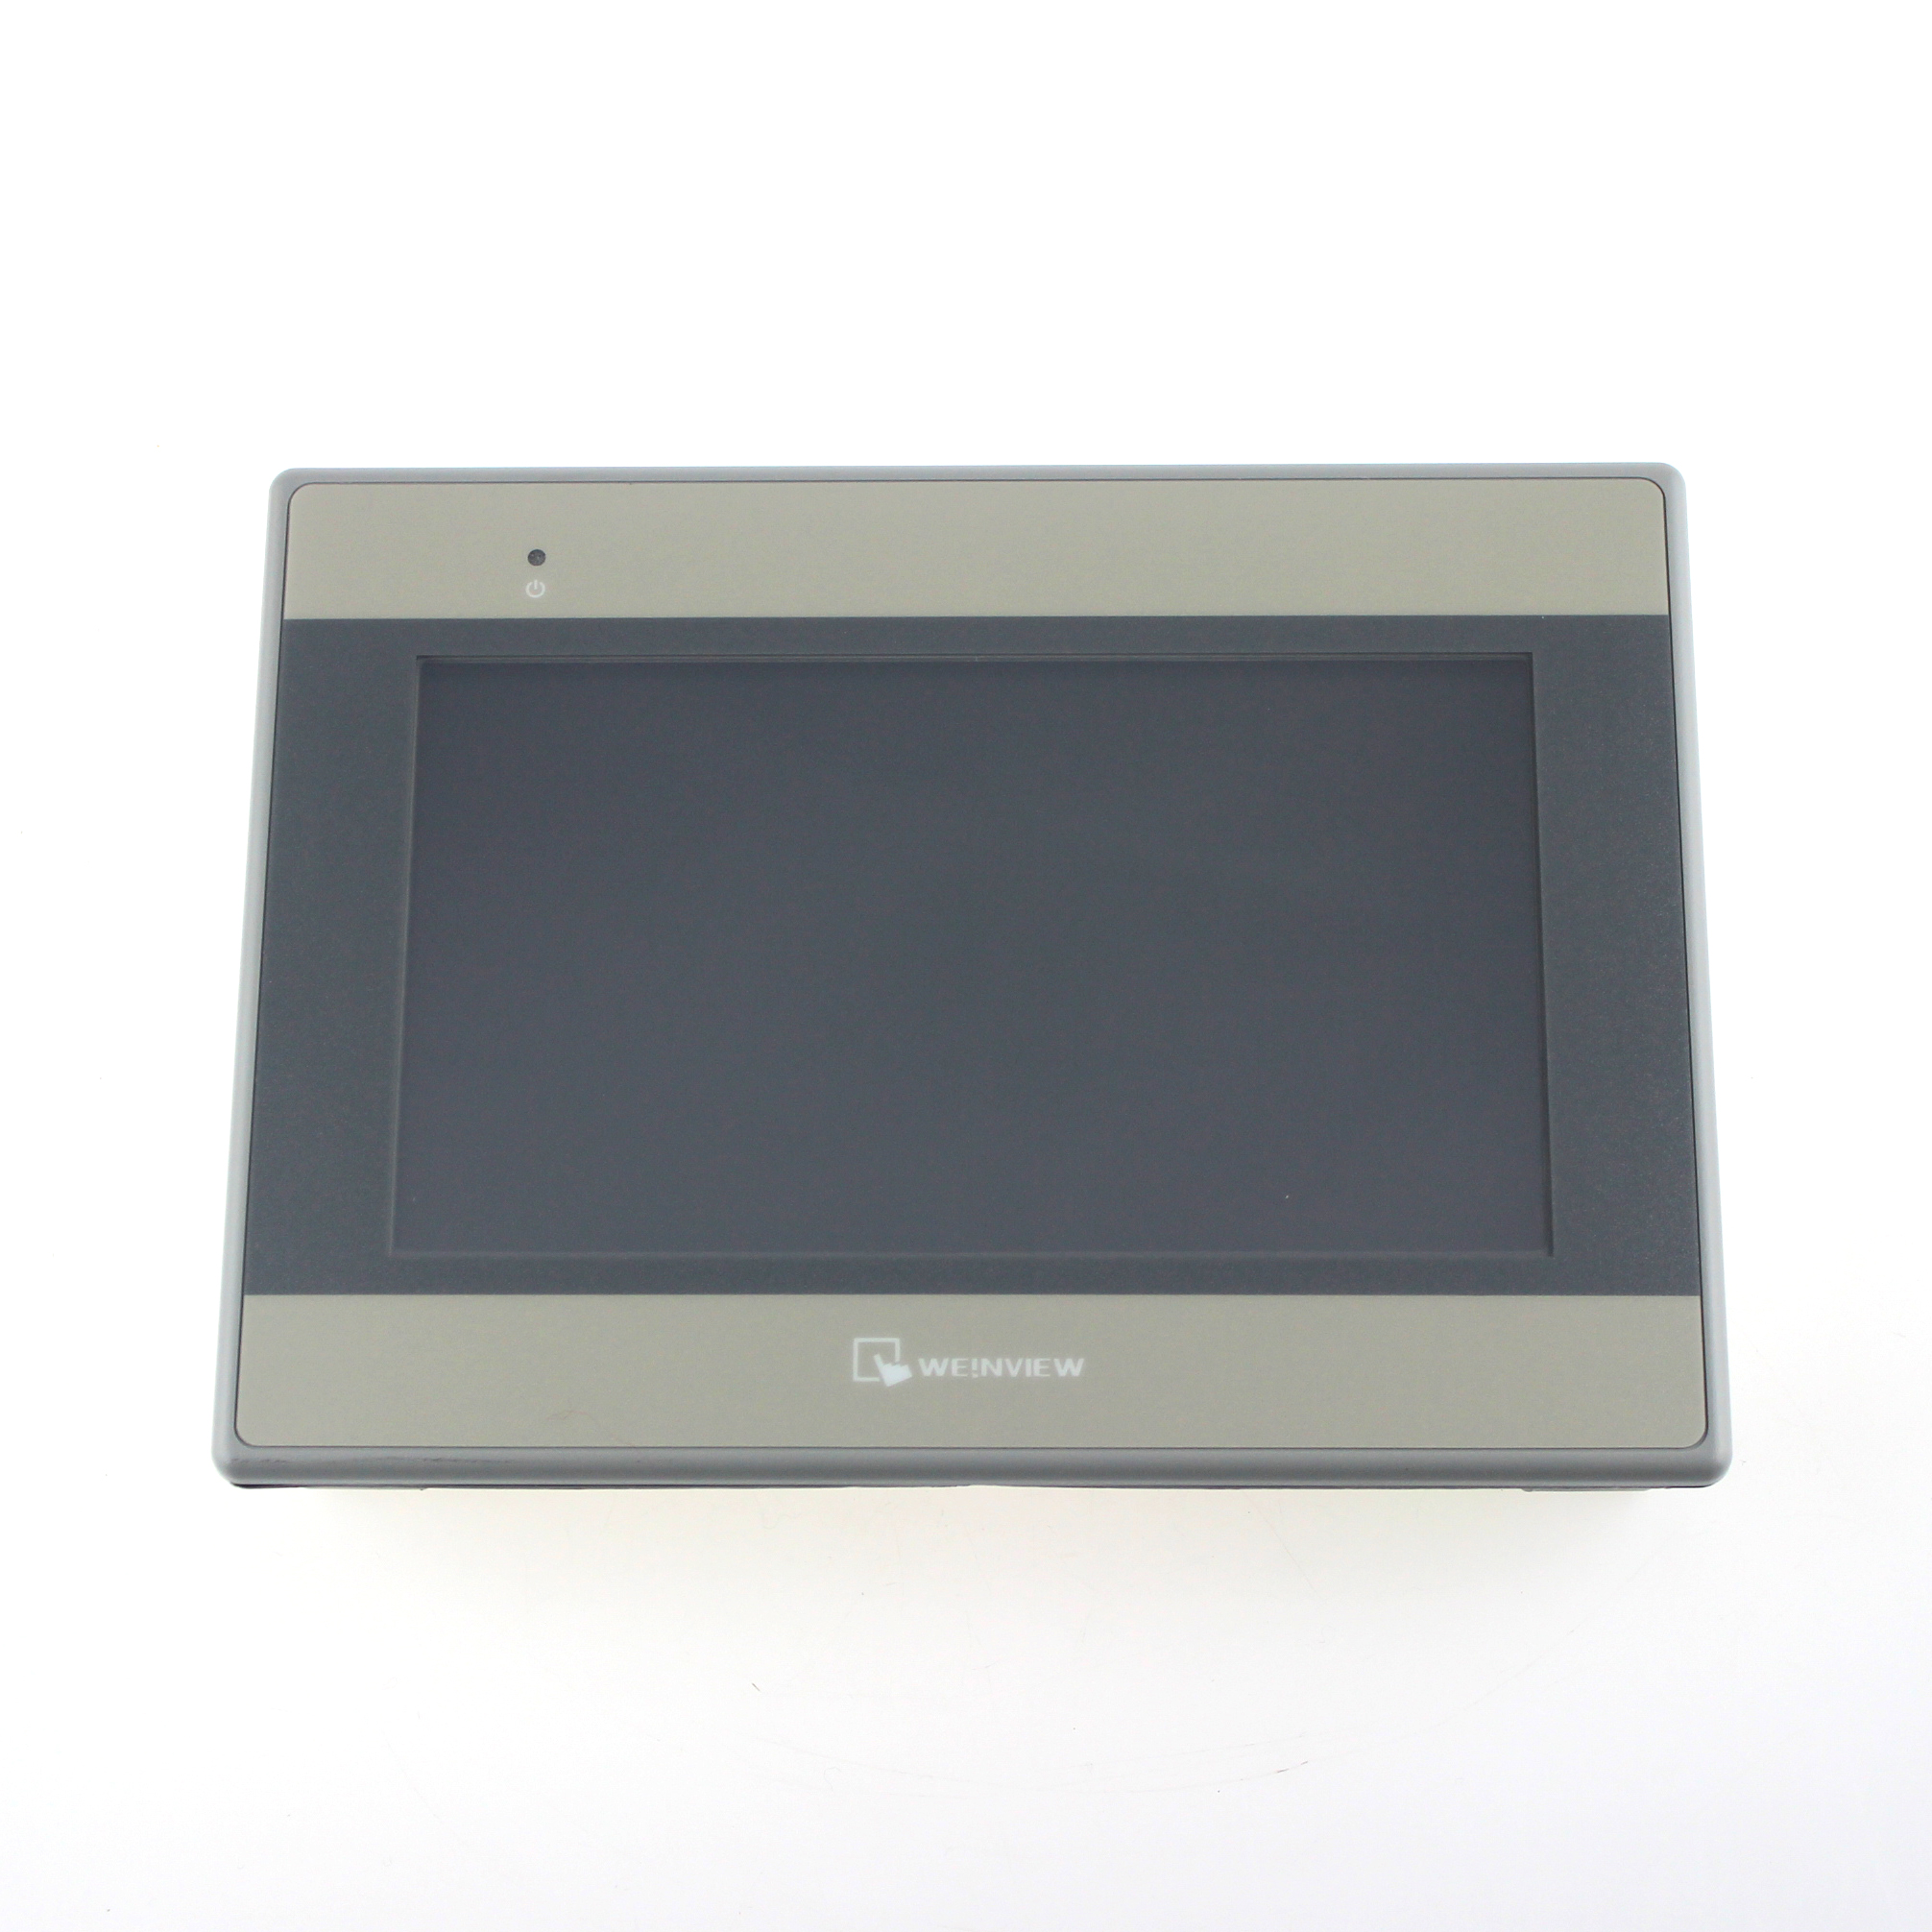 7 inch HMI Touch Screen Ethernet USB Host Weinview MT8071iE 800x480 TFT Display with Software New in Box 